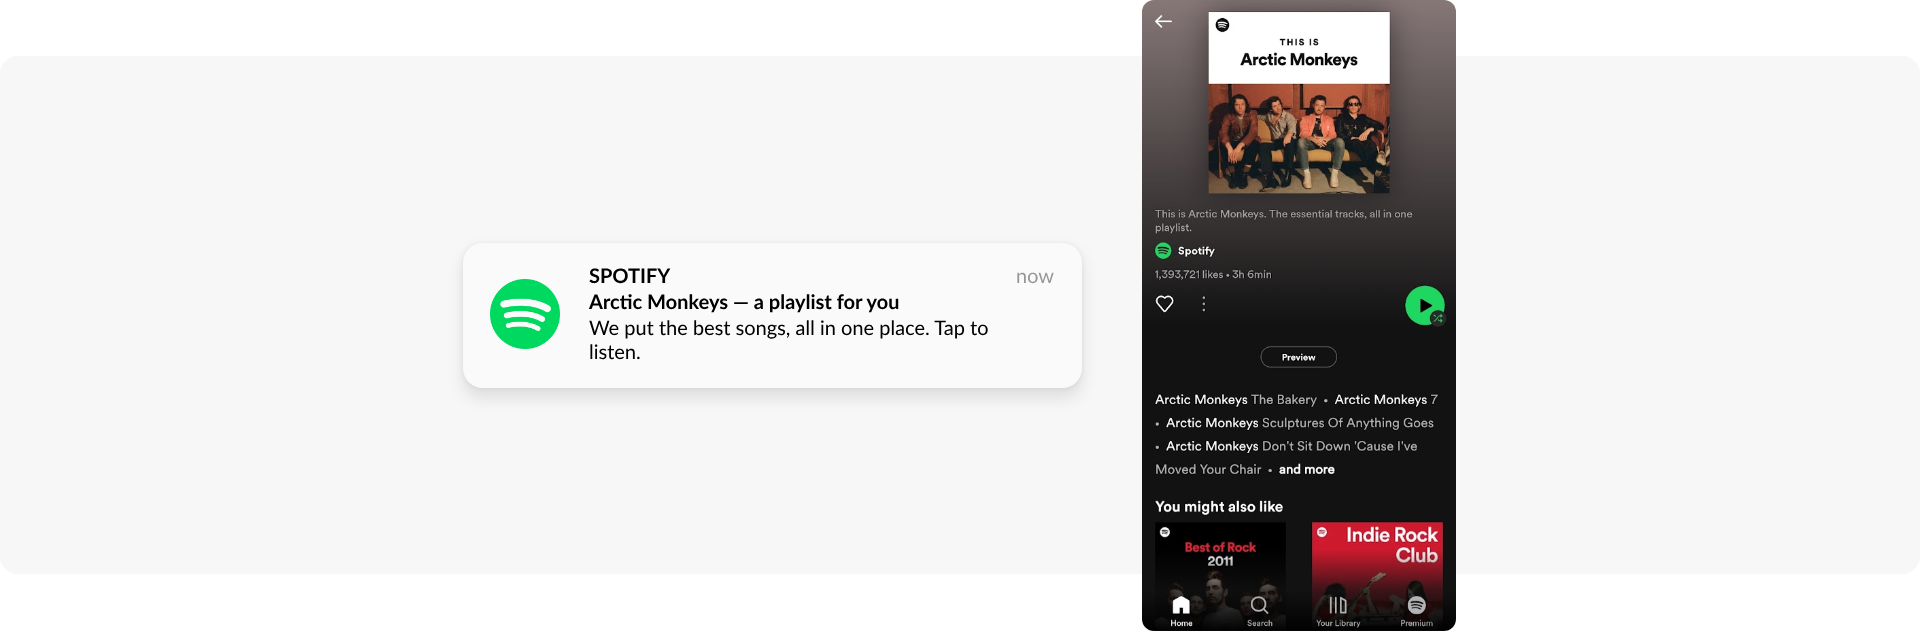 A push notification from Spotify takes a user to a personalized playlist